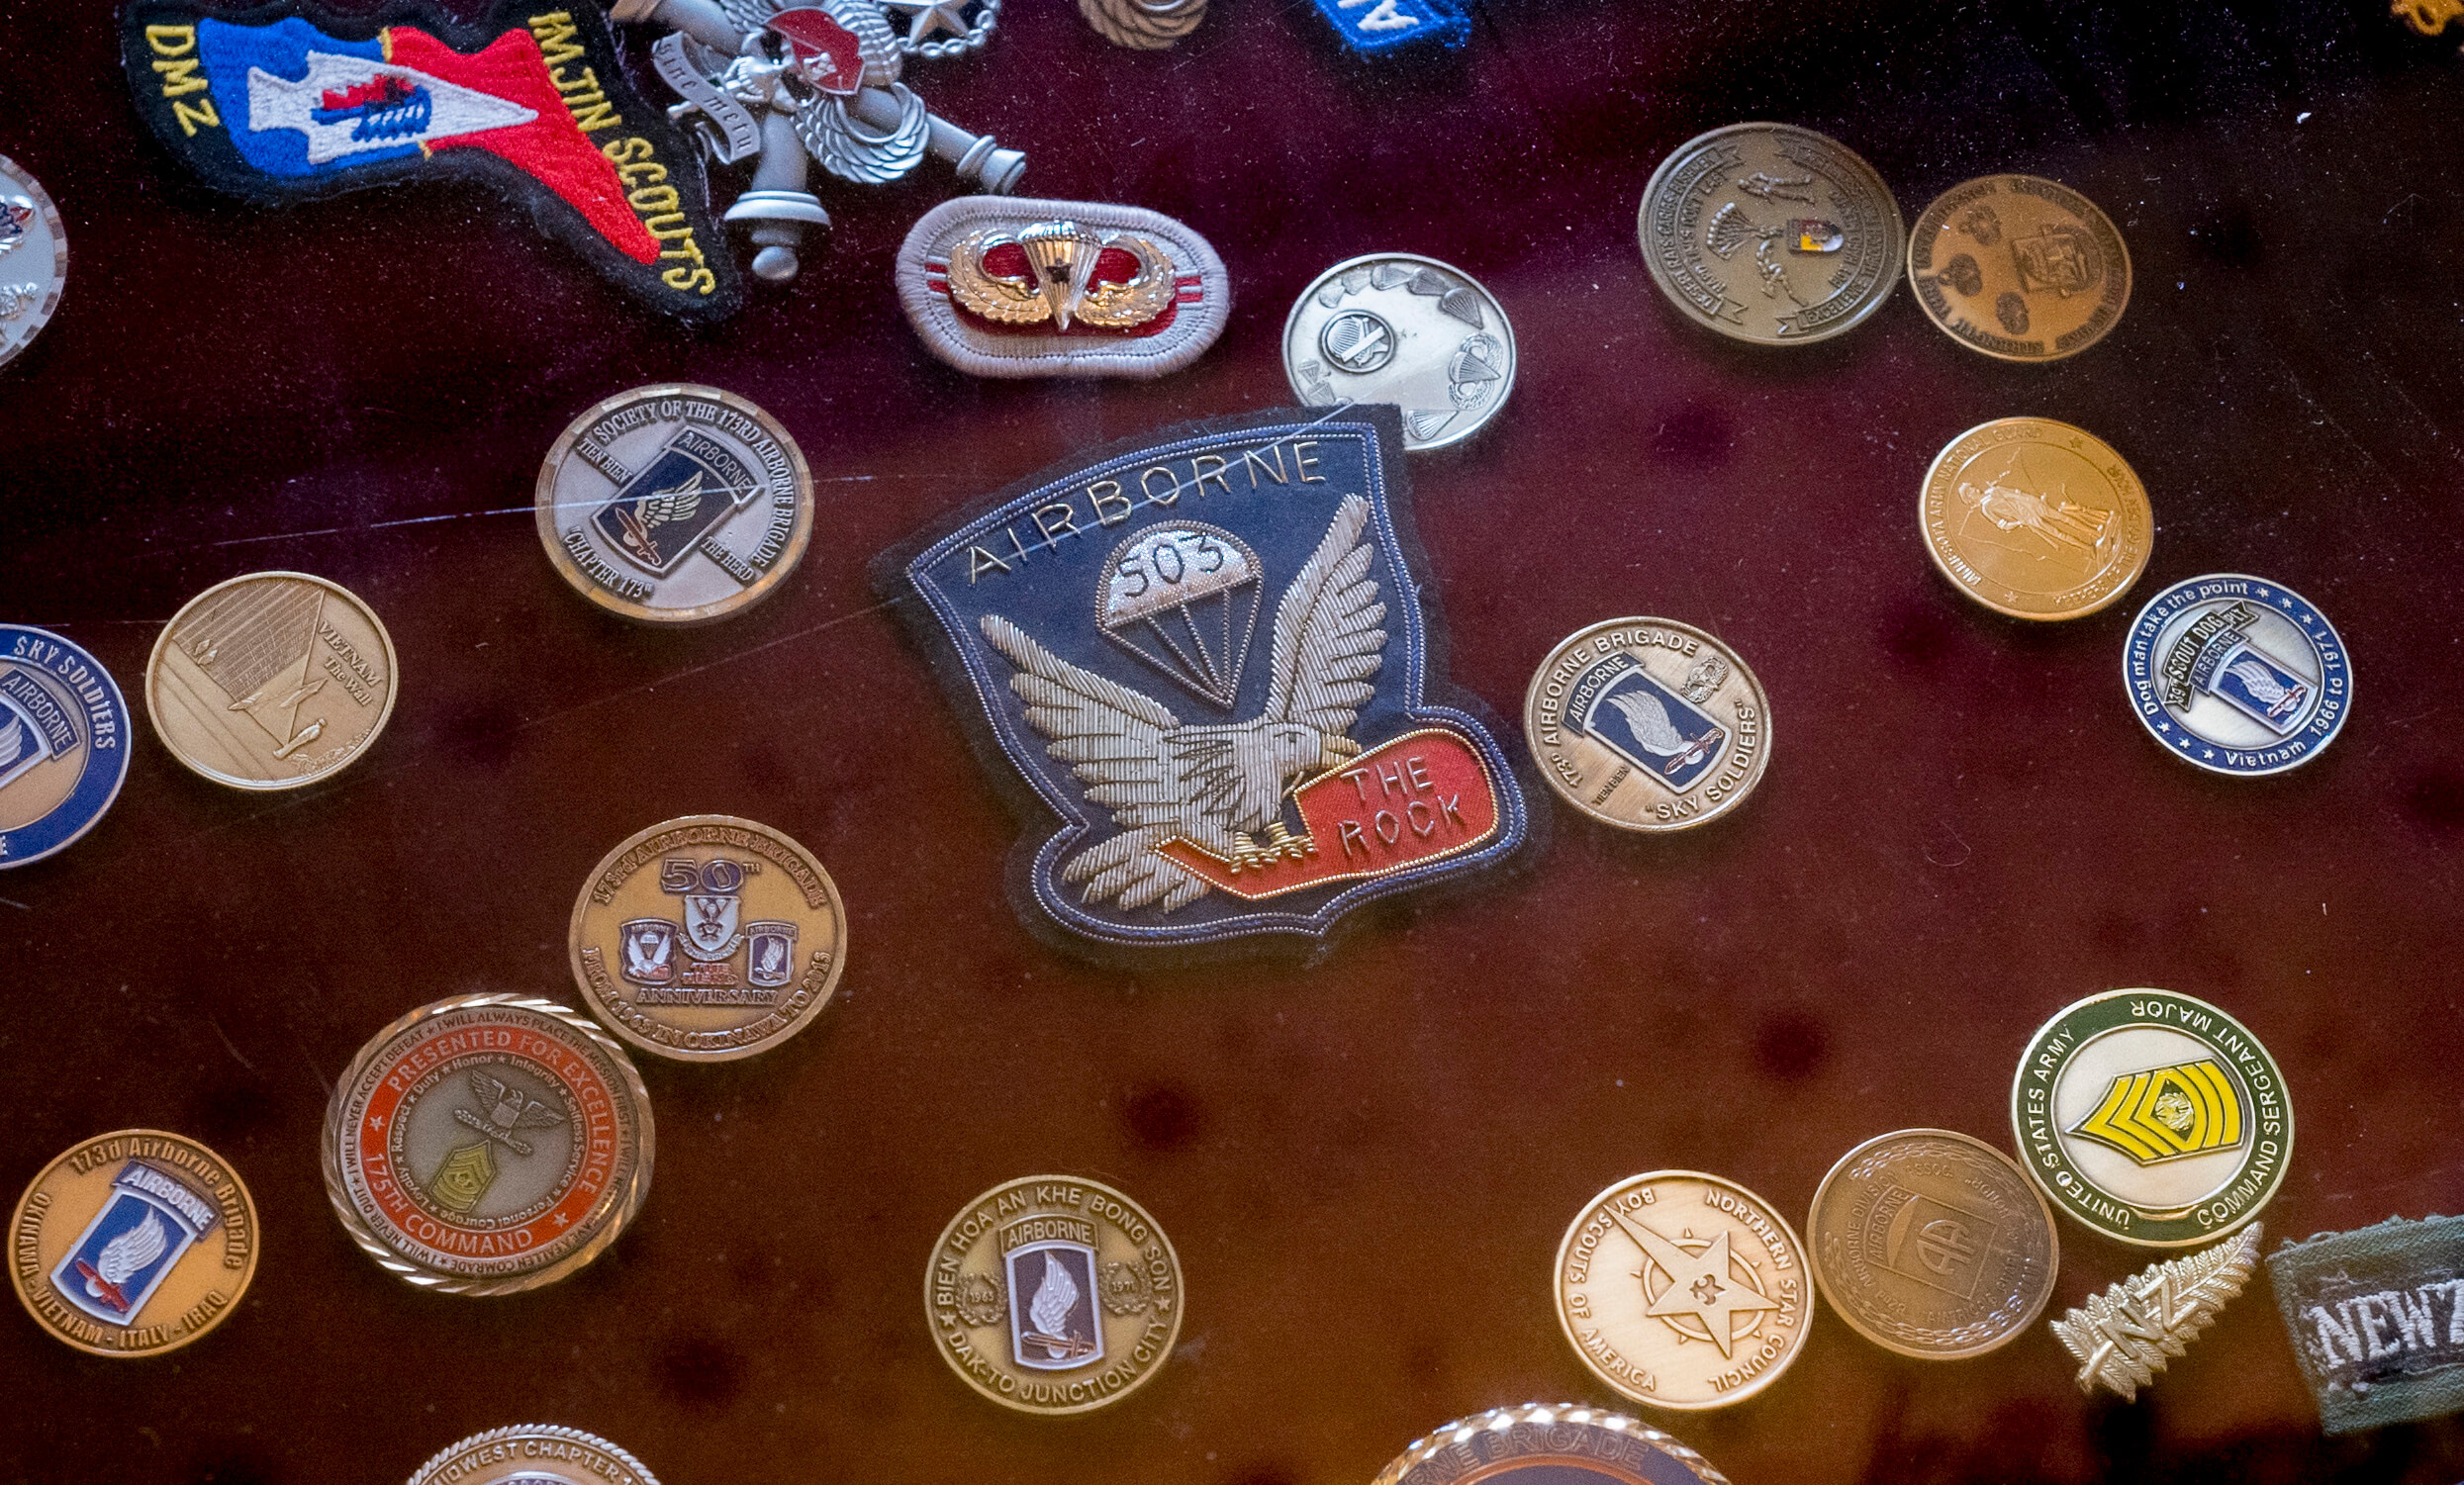 Military memorabilia and patches